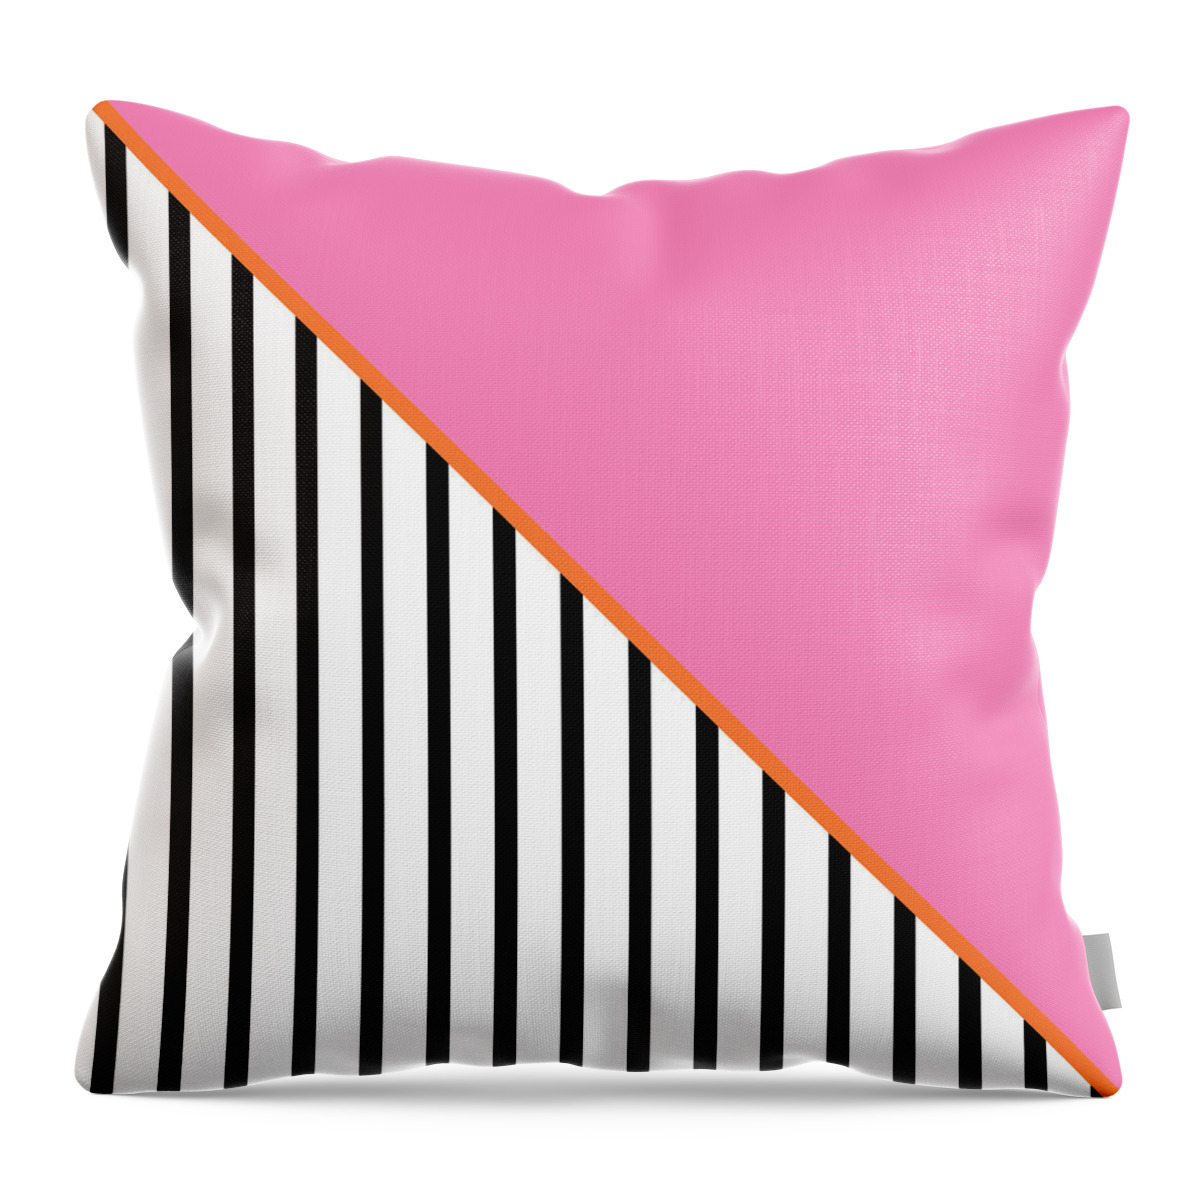 Pink Throw Pillow featuring the digital art Pink and Orange and Black Geometric by Linda Woods